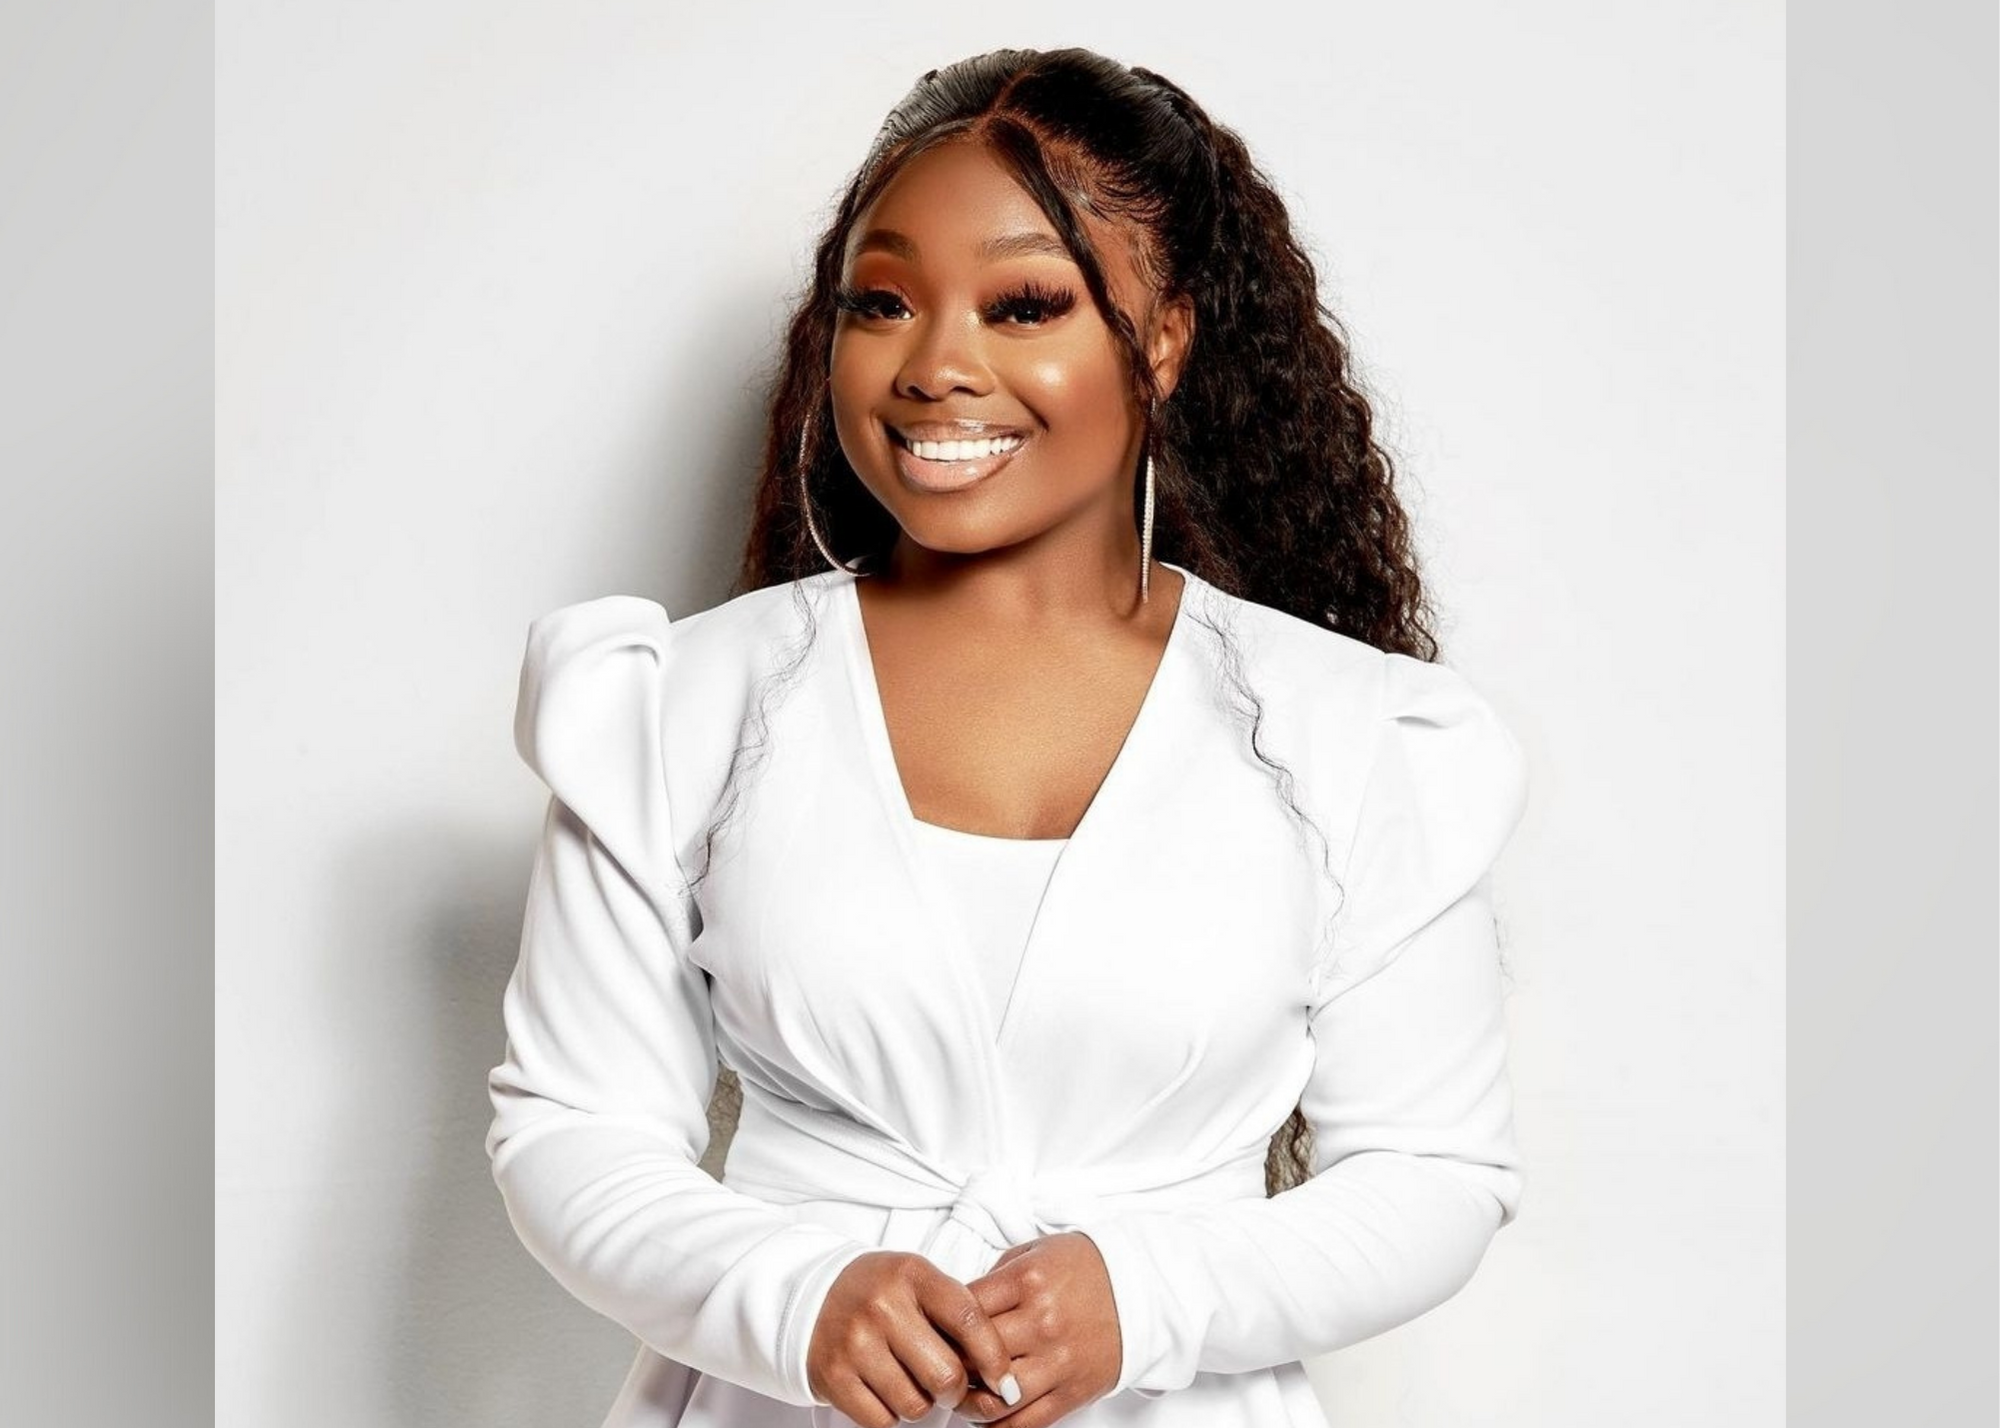 Gospel Recording Artist Jekalyn Carr Launches Her Own Beauty Company